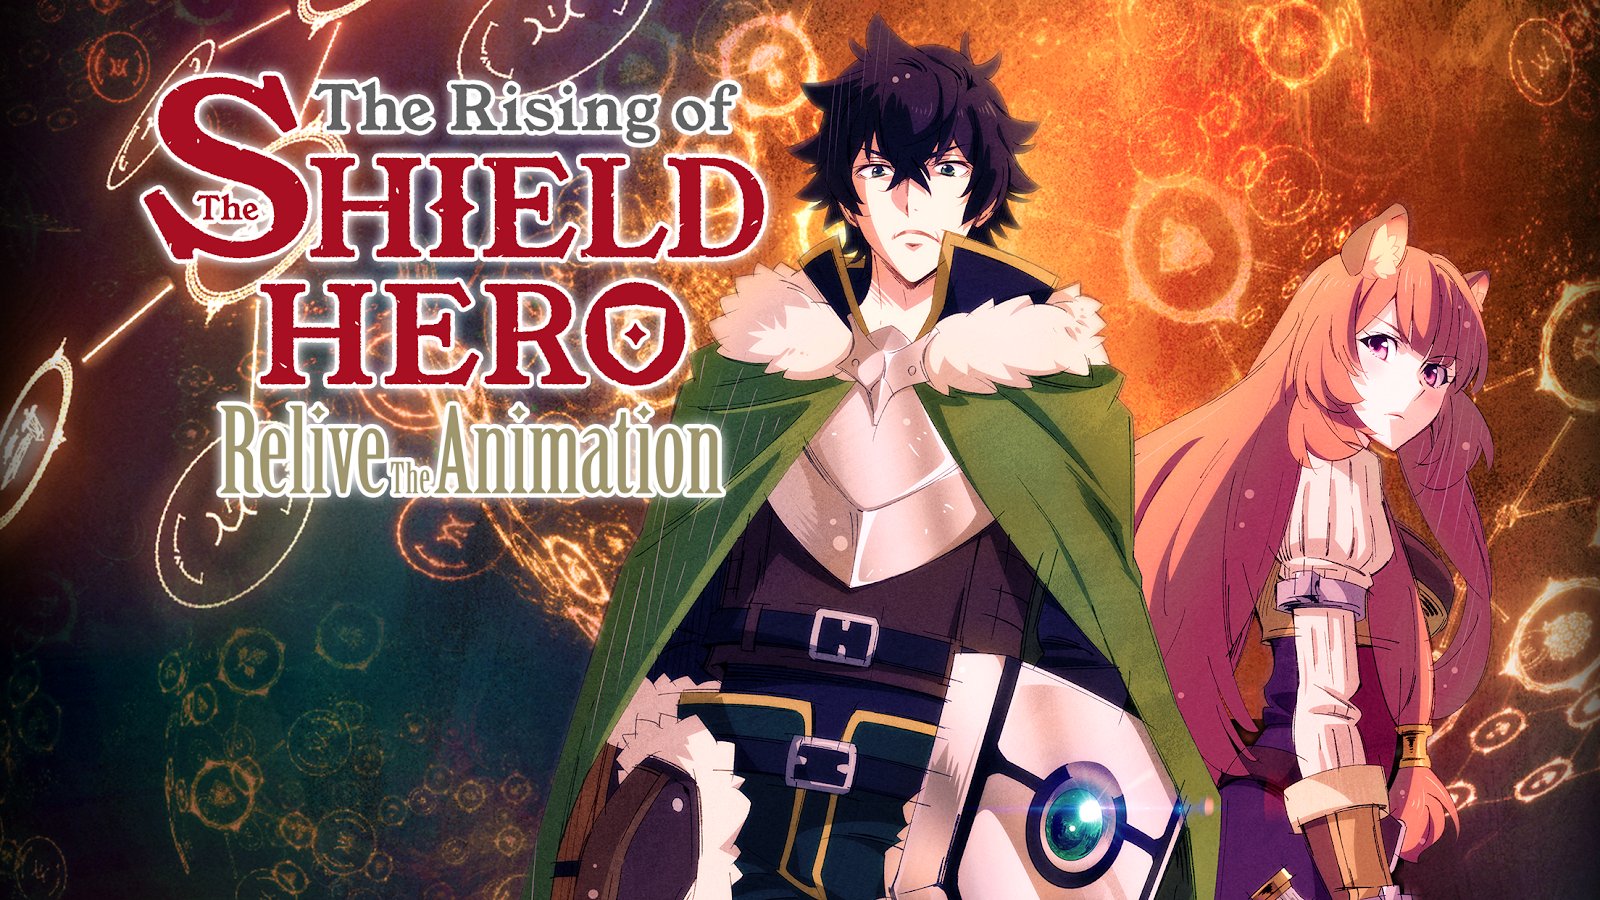 Download The Rising of The Shield Hero Relive The Animation.